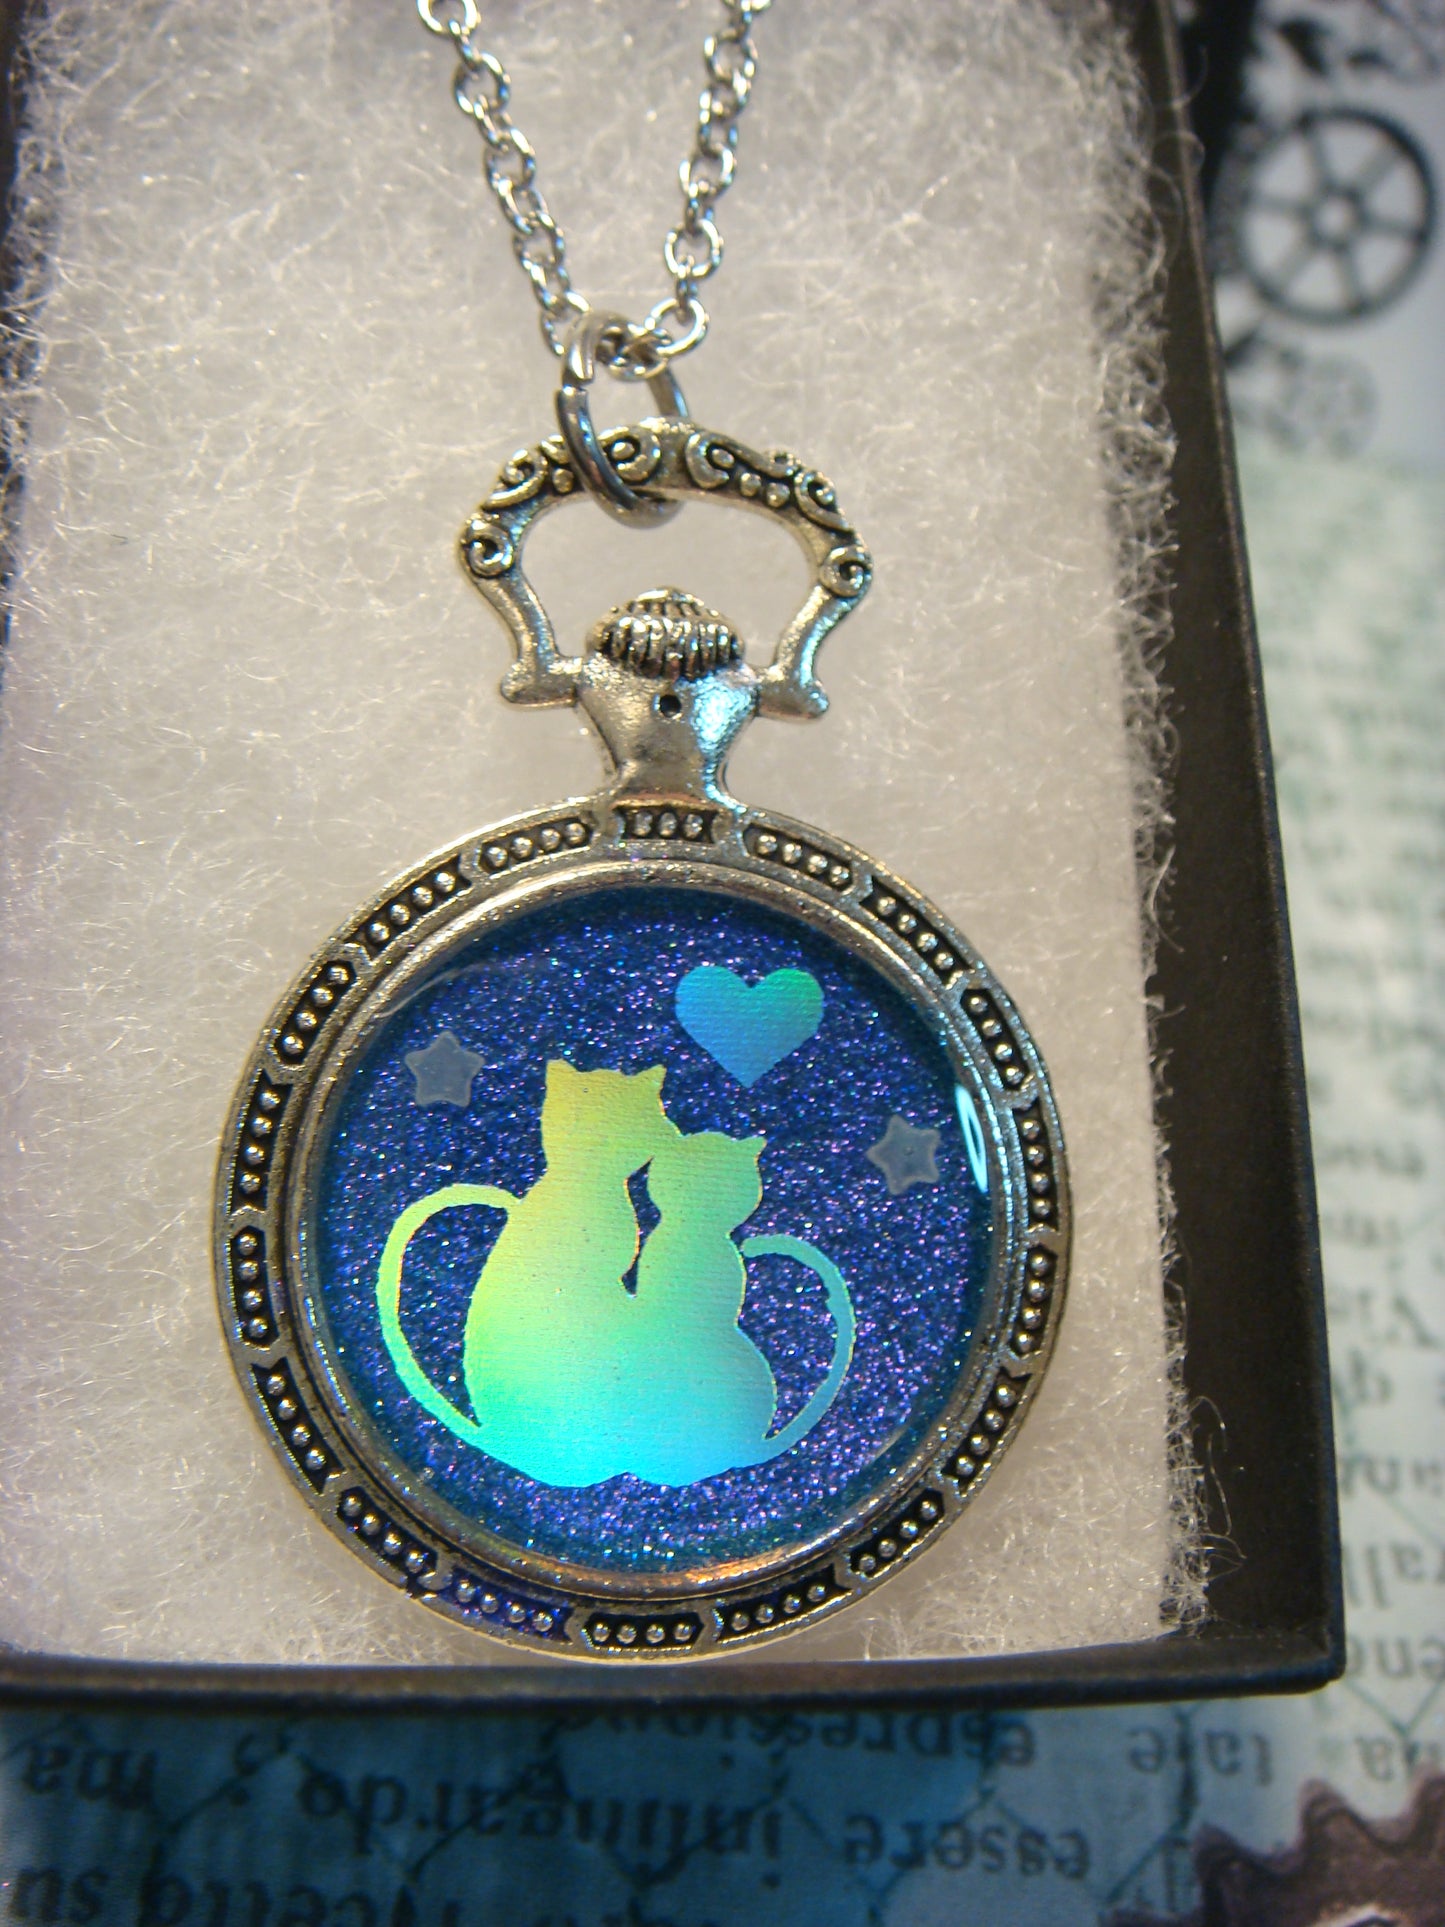 Snuggling Cats with Heart Pocket Watch Pendant Necklace